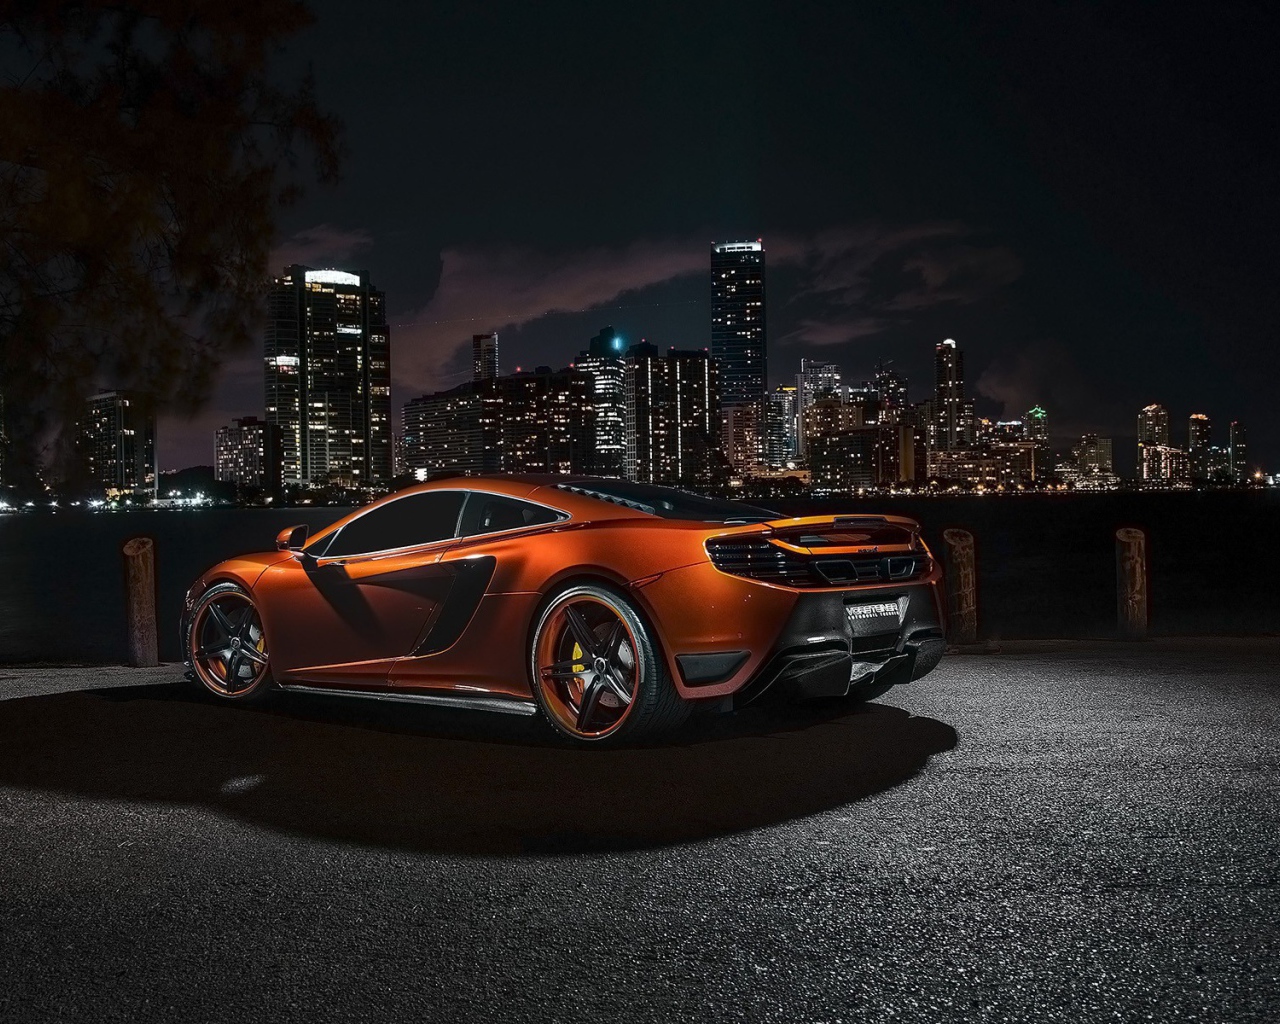 Orange McLaren MP4-12C against the backdrop of the city at night